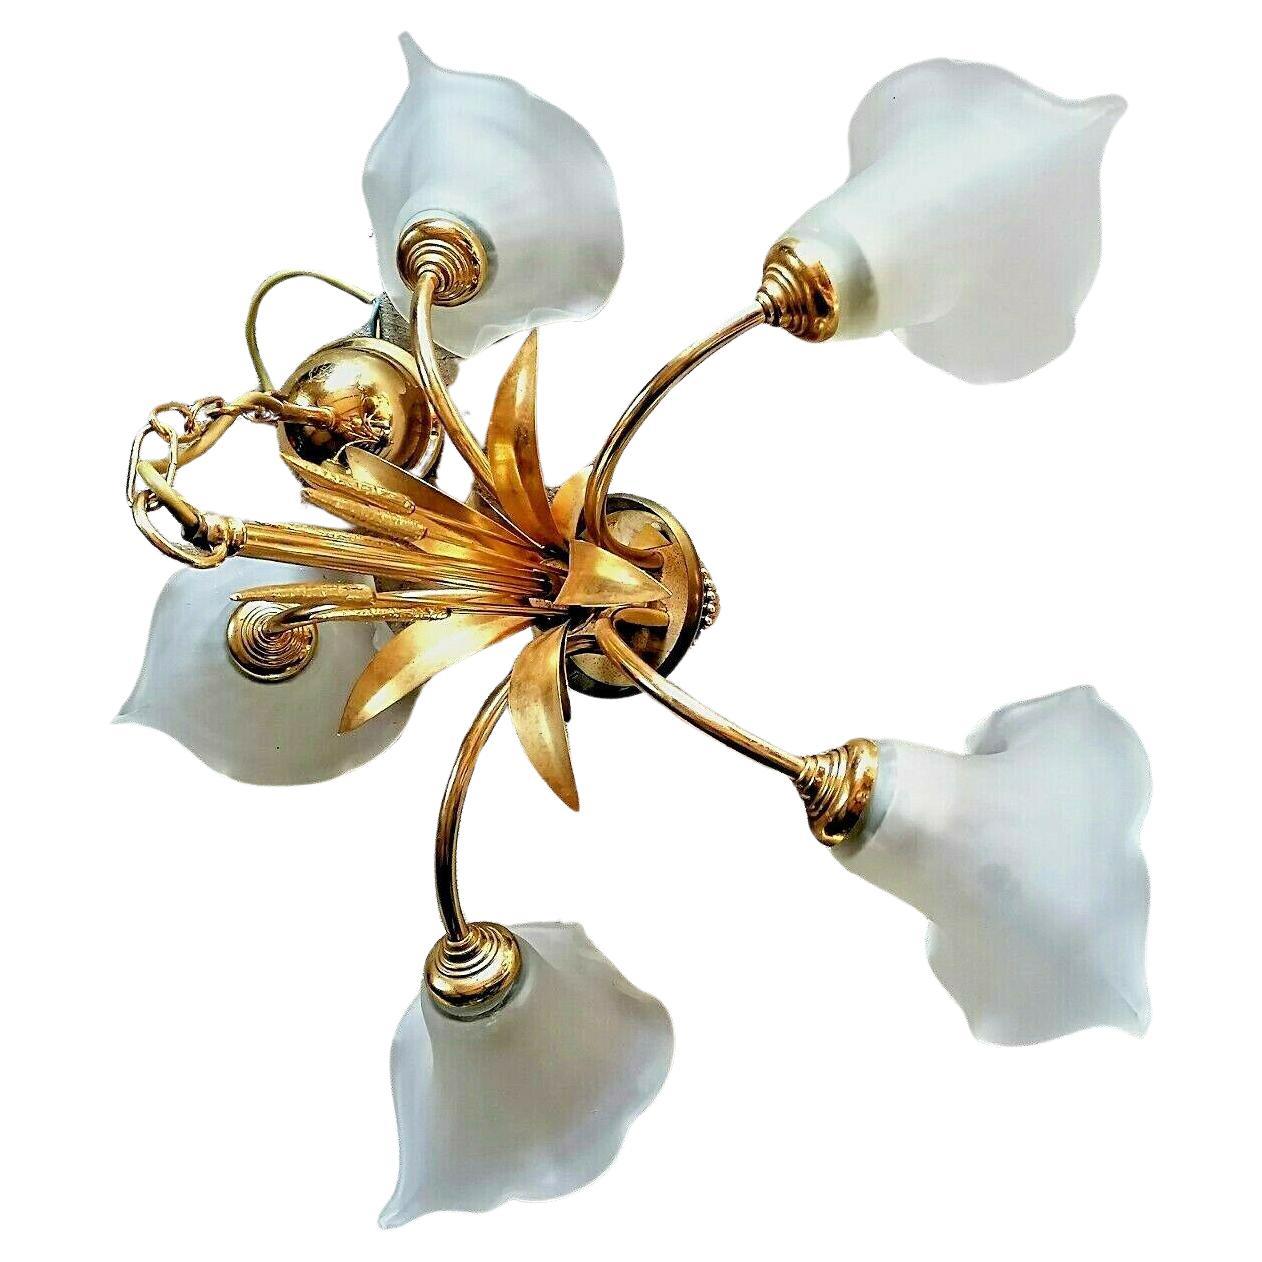 1960's French Mid Century Modern Gilt Floral Form Chandelier with Floral Shades For Sale